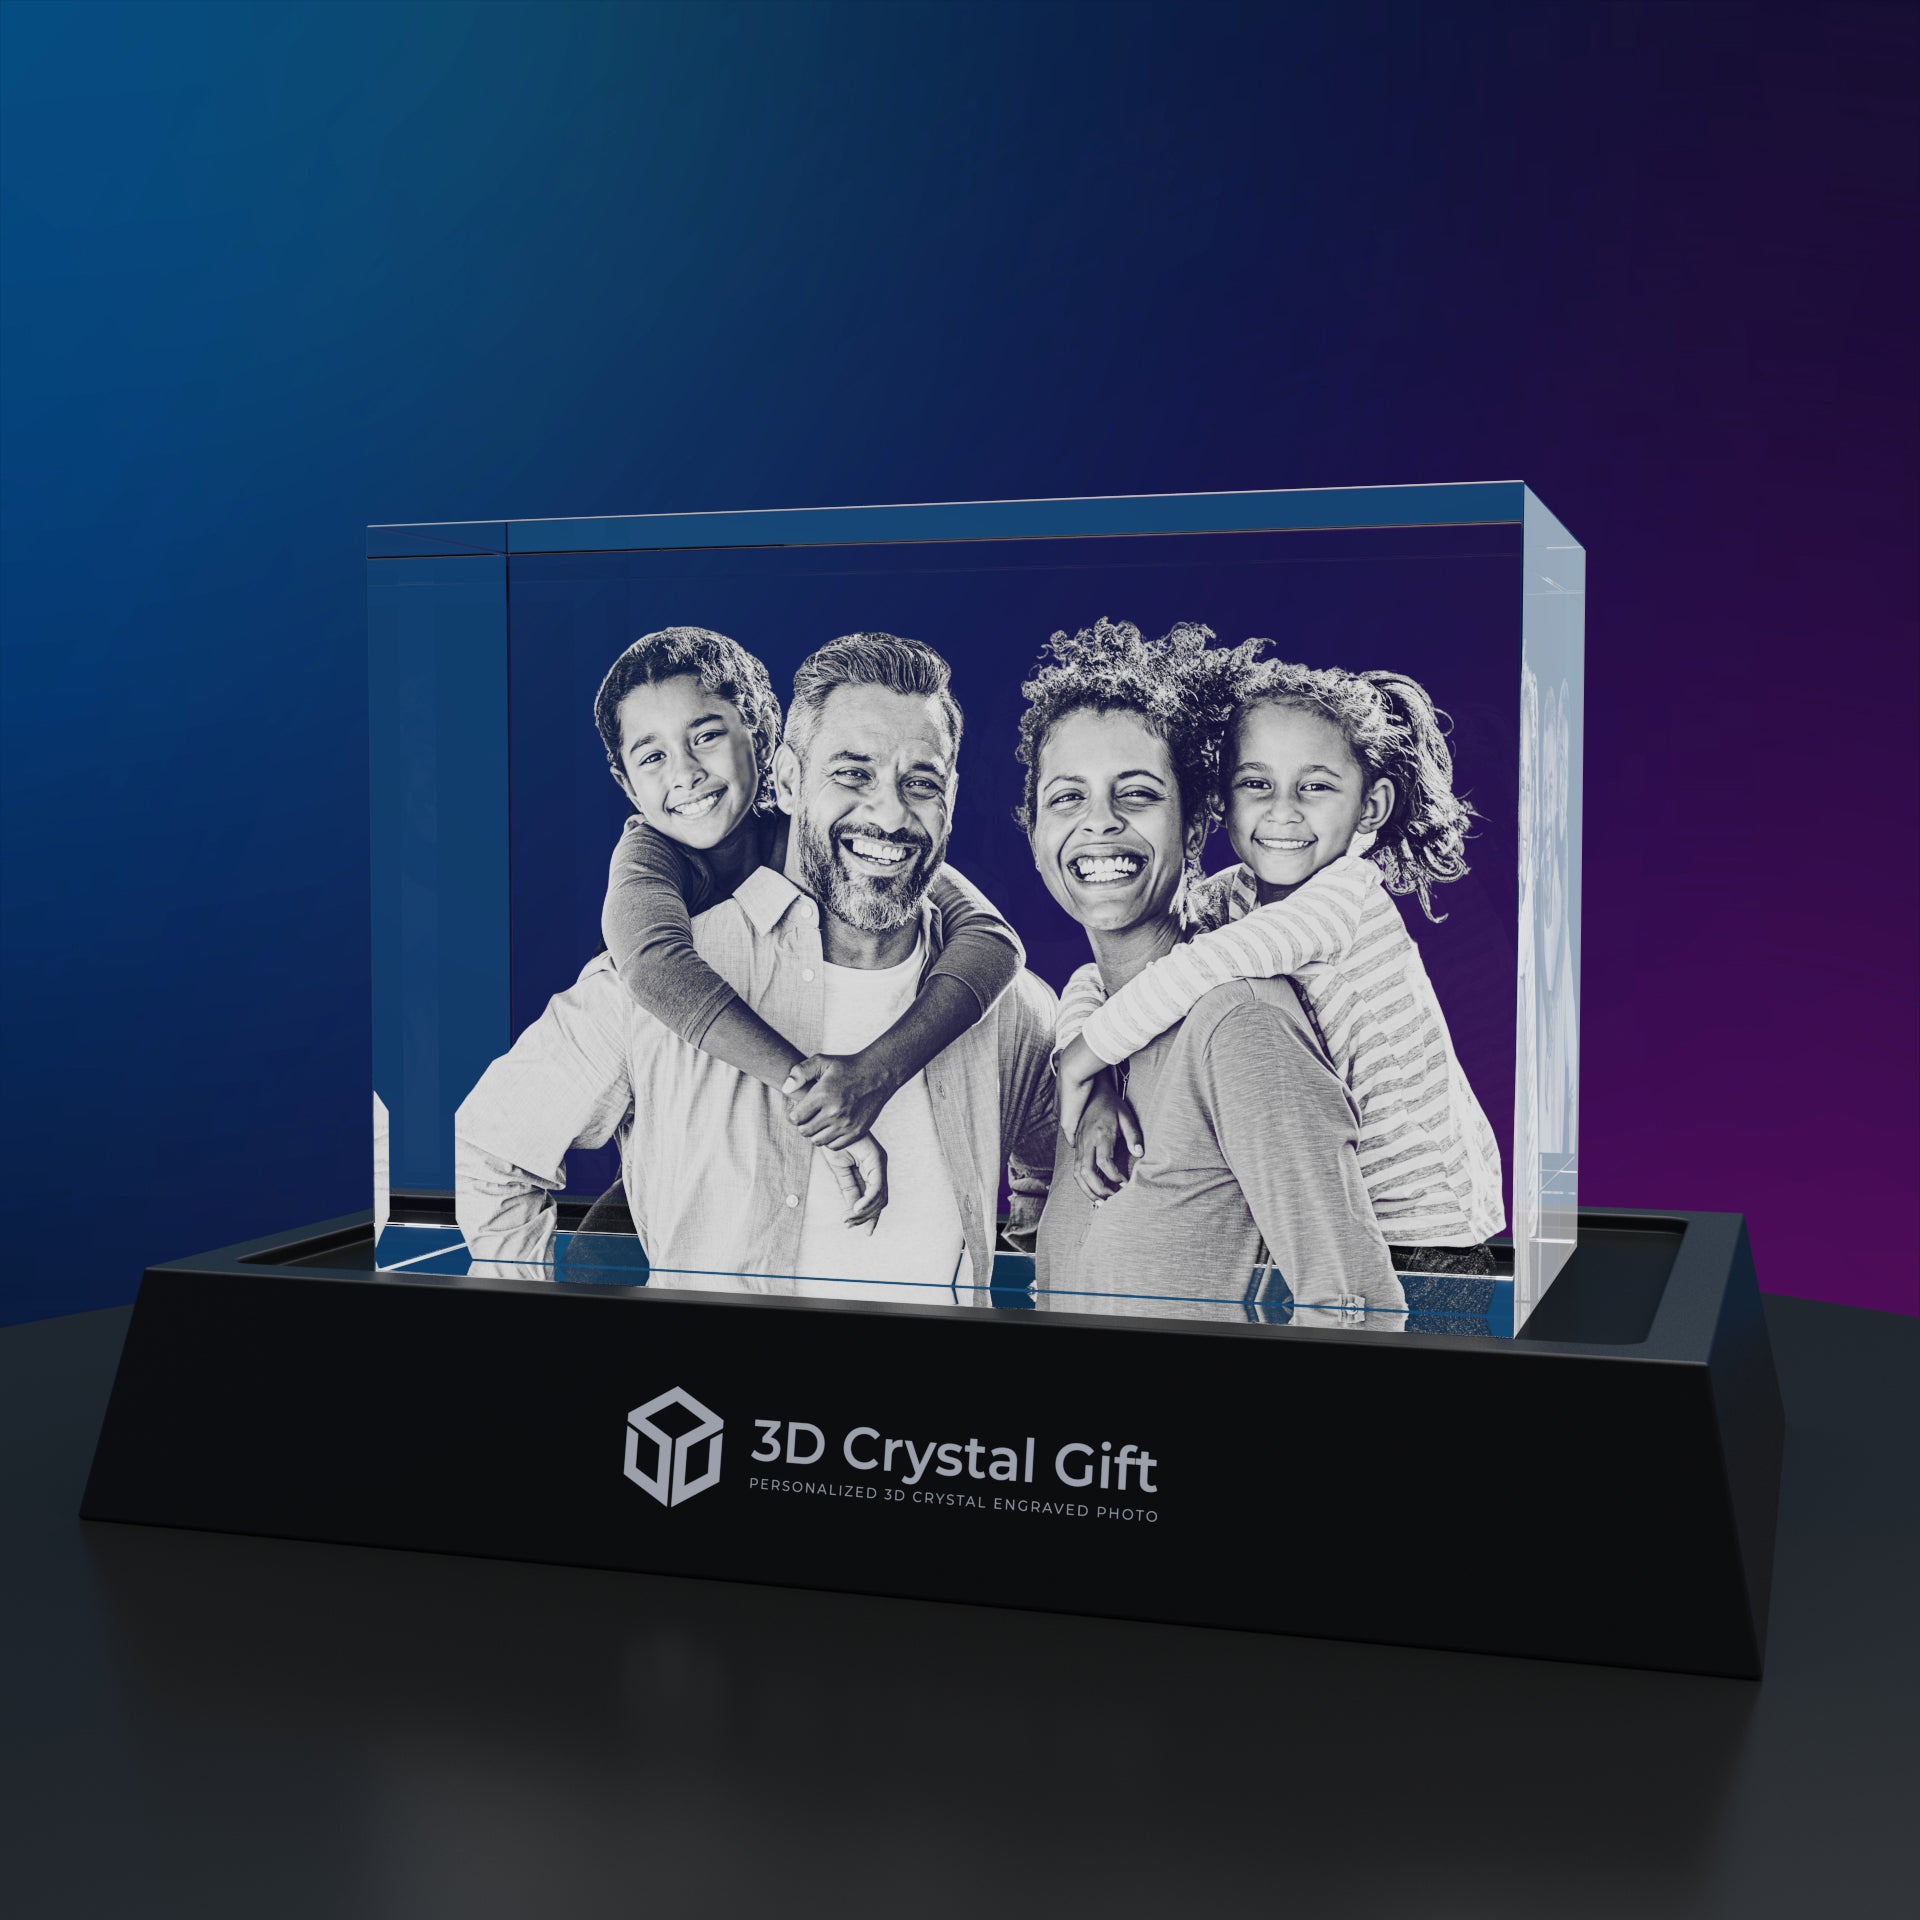 50x80x50mm 3D Crystal Personalized Gift Manufacturer In Kolkata- Latest  Price